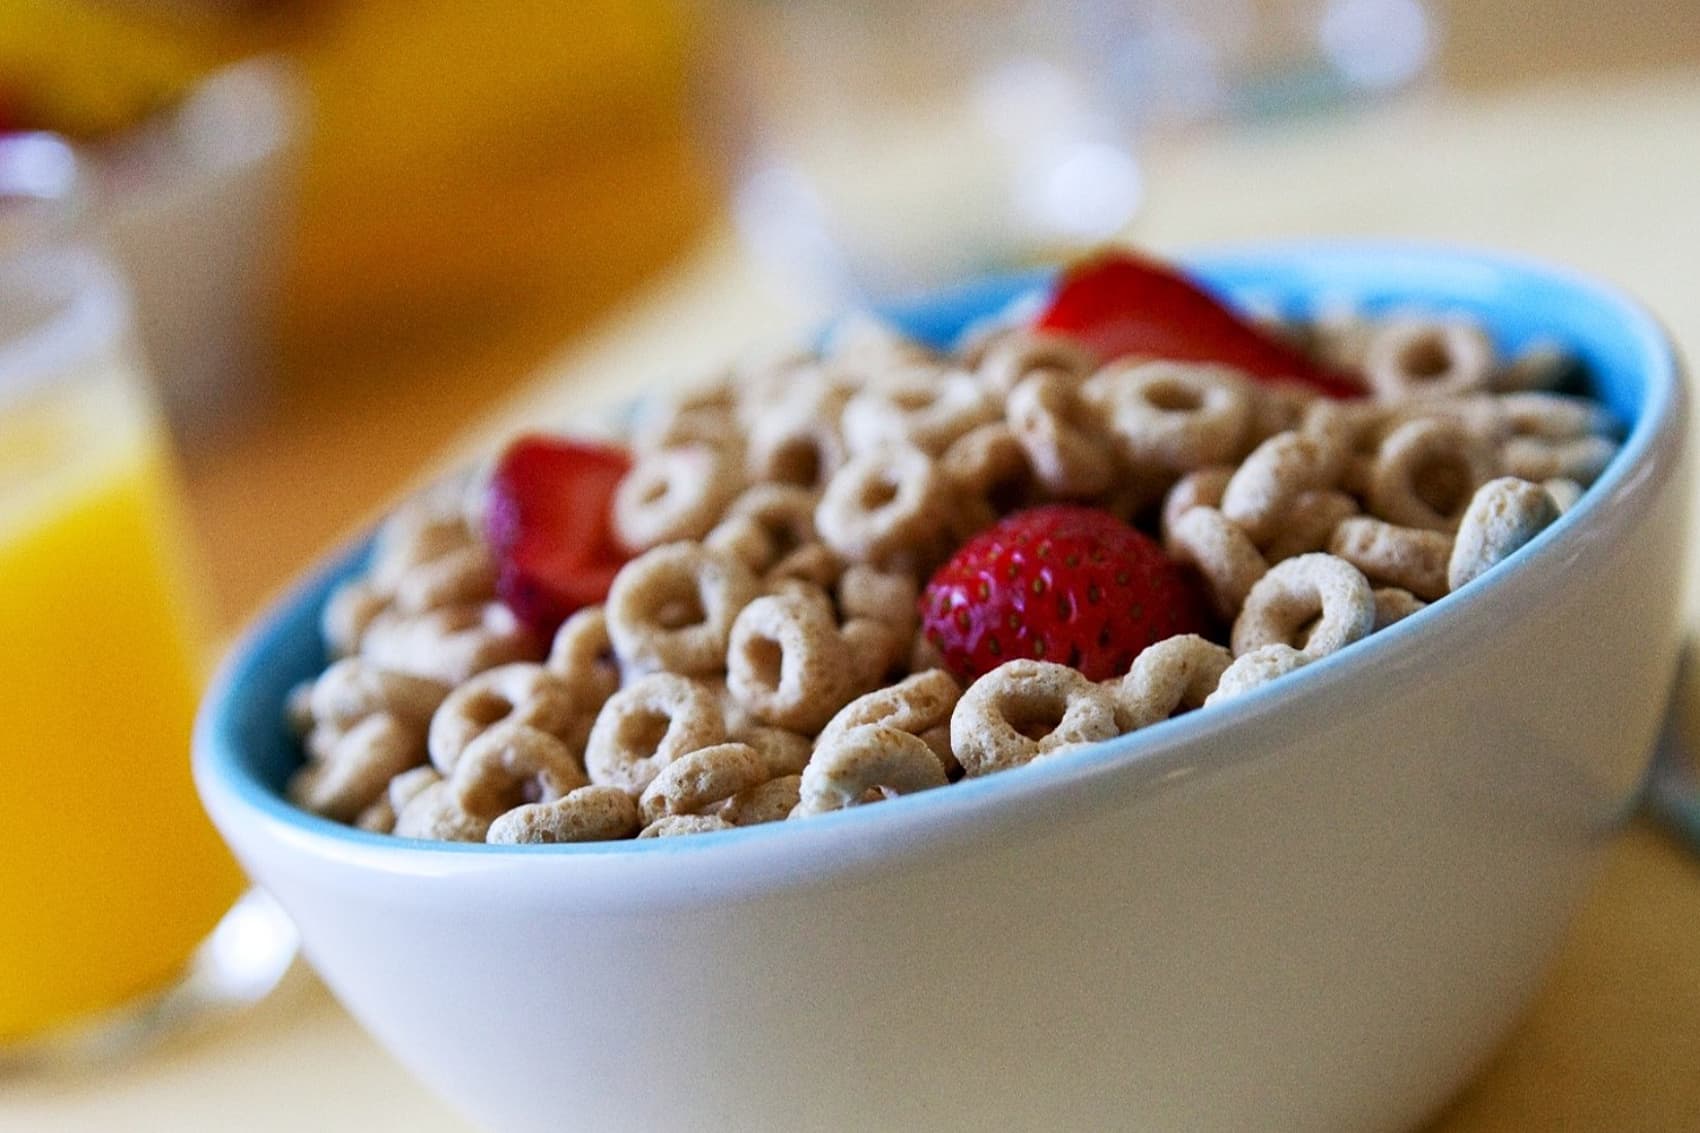 Bowl of Cheerios with straberries